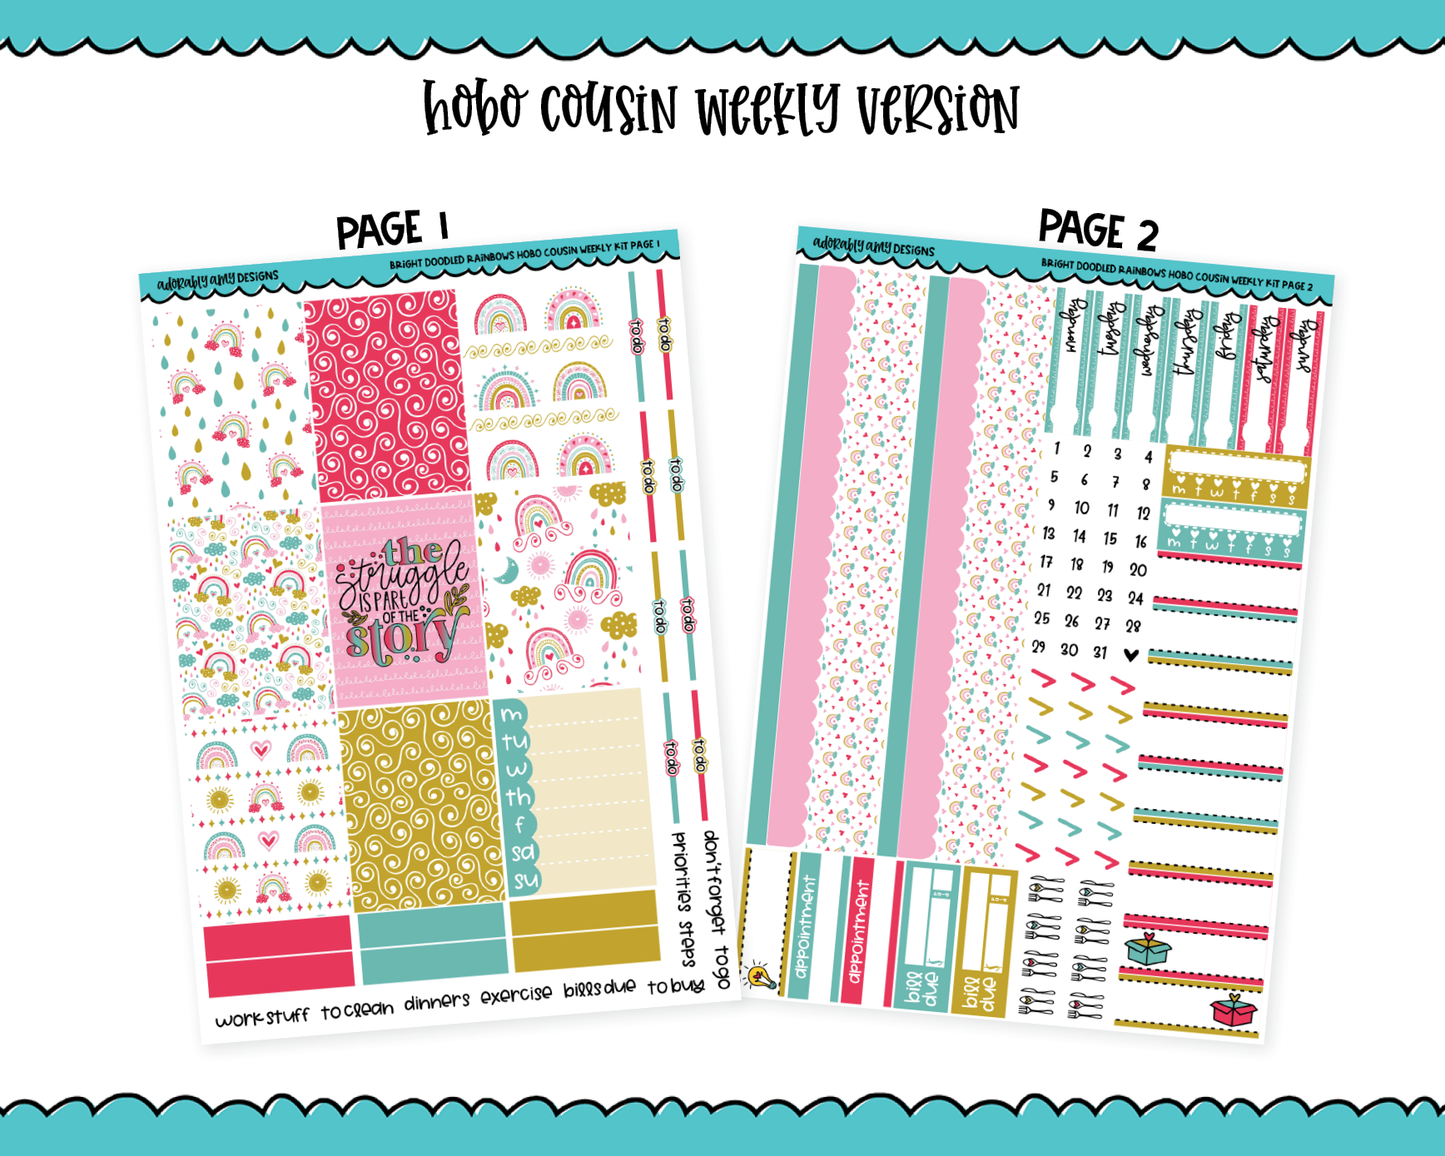 Hobonichi Cousin Weekly Bright Doodled Rainbows Themed Planner Sticker Kit for Hobo Cousin or Similar Planners